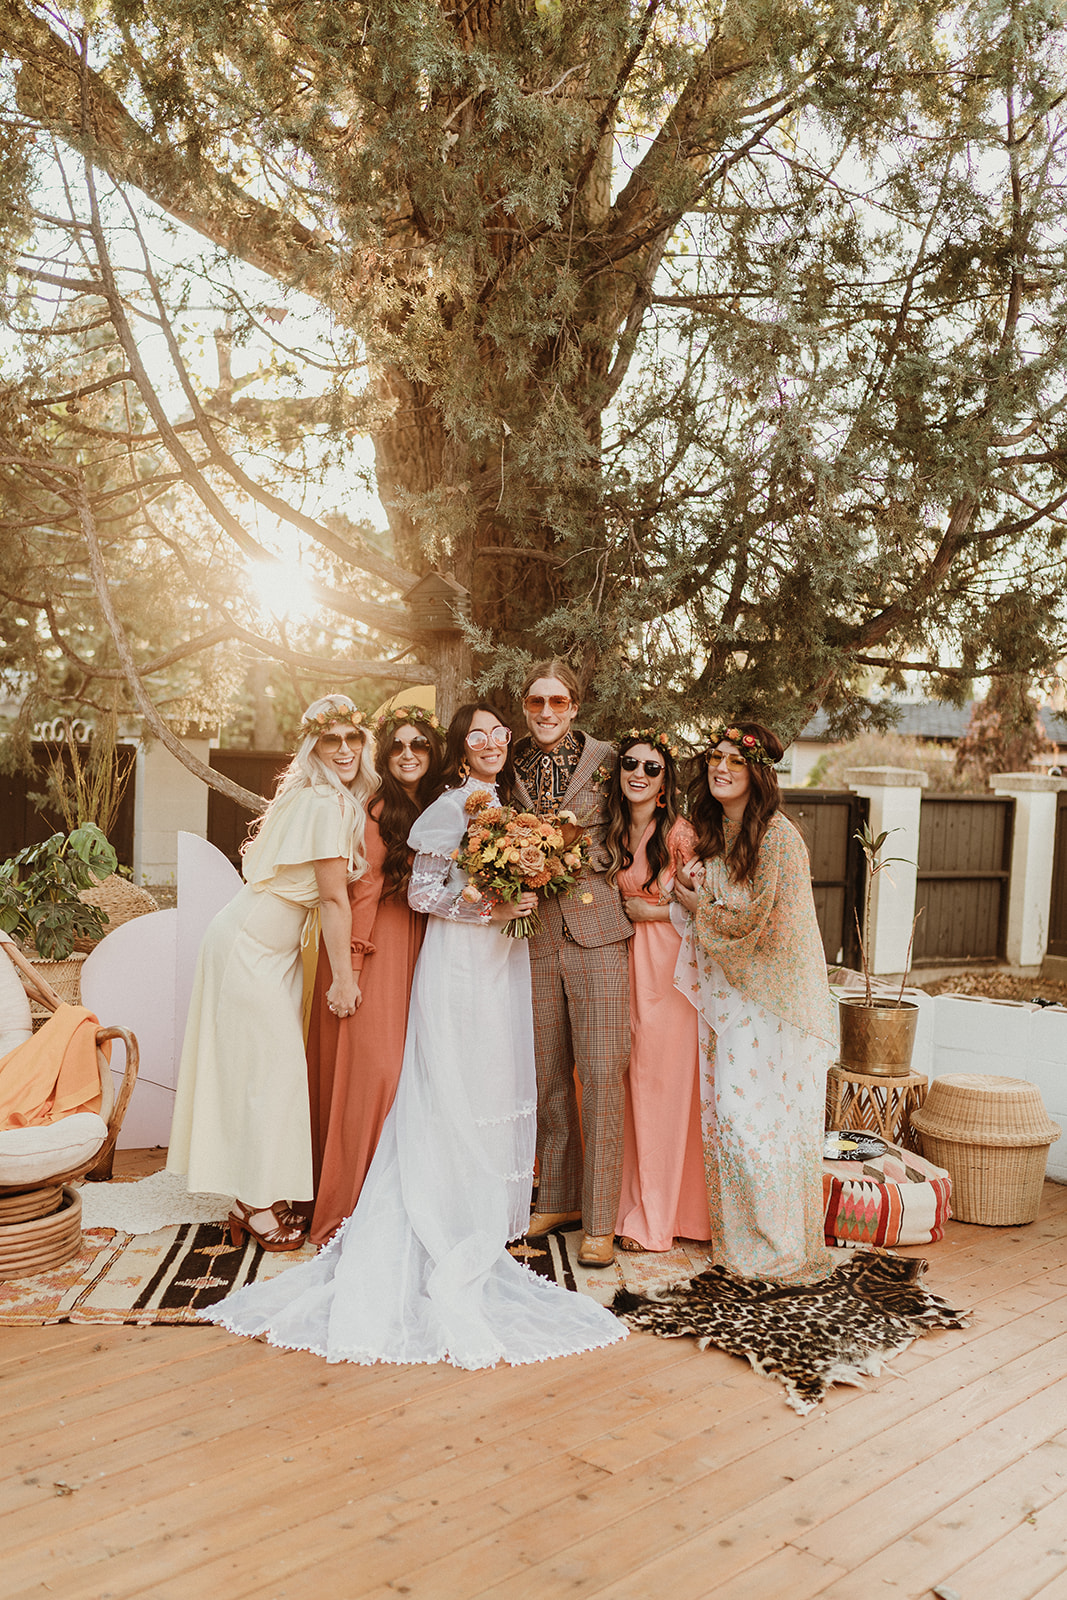 Retro wedding inspiration for the bride and groom in search of casual 70's style